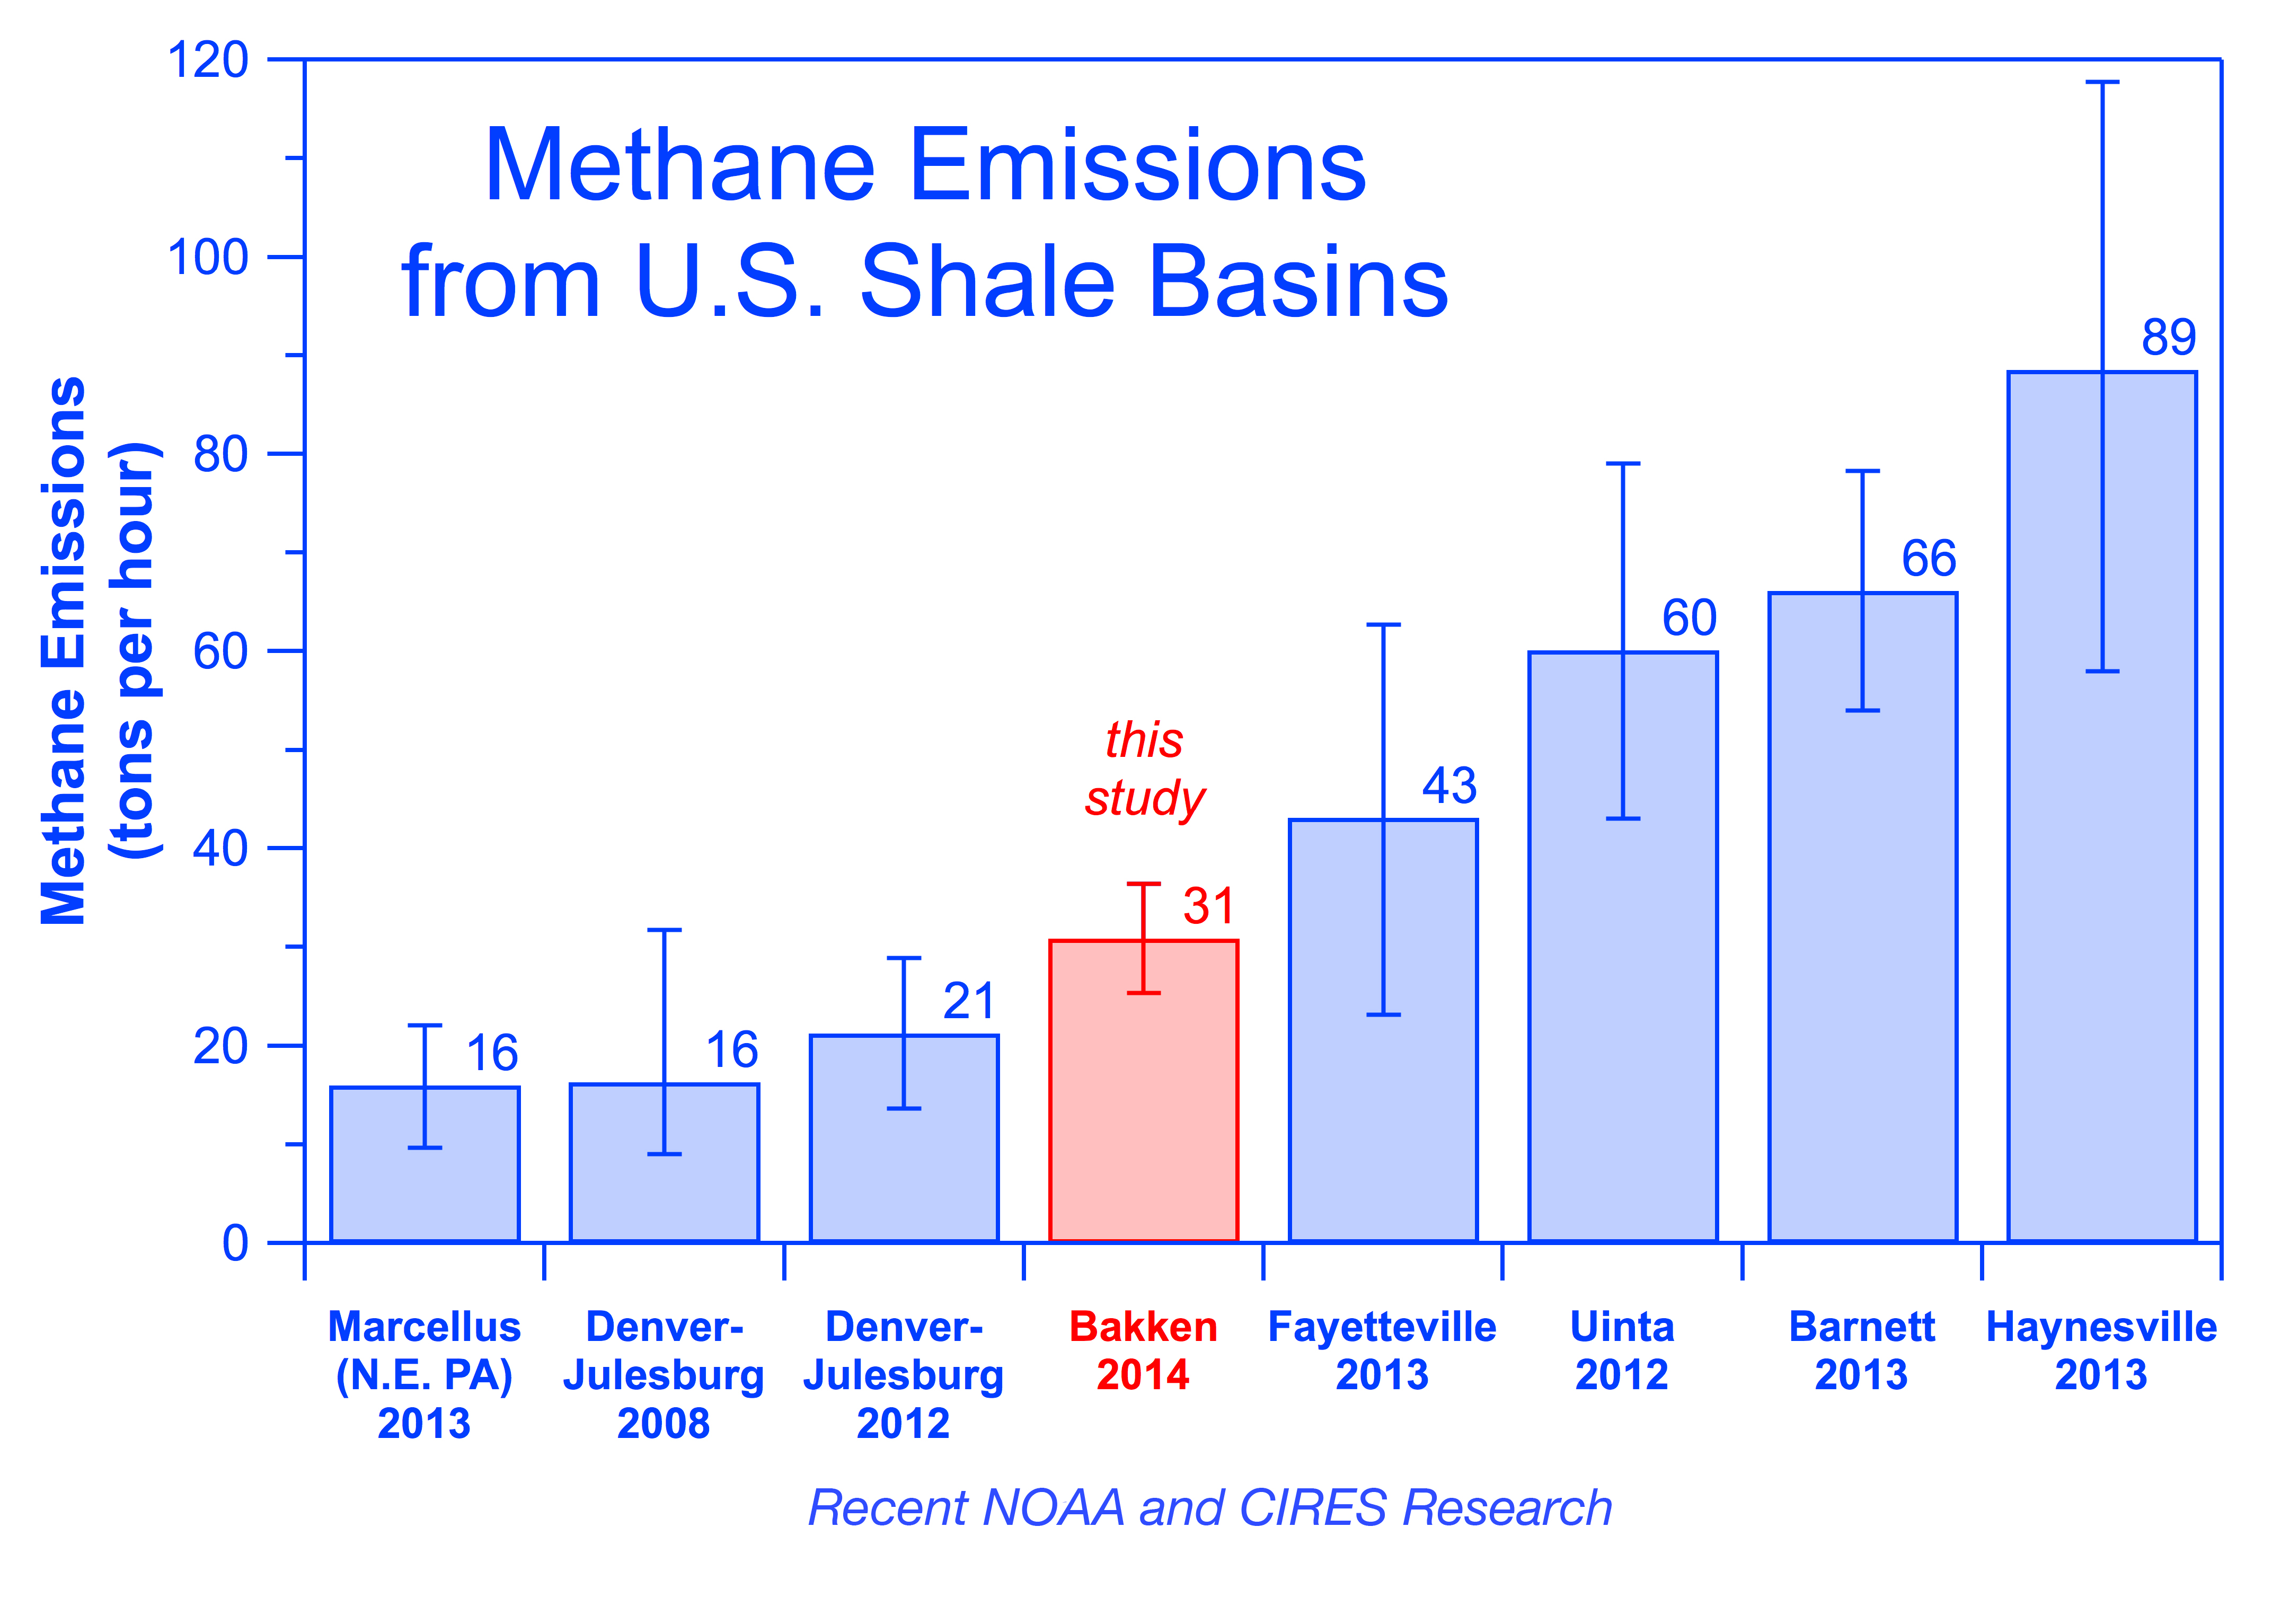 Recent NOAA studies have quantified methane emission rates from these major U.S. oil and gas basins. (NOAA)